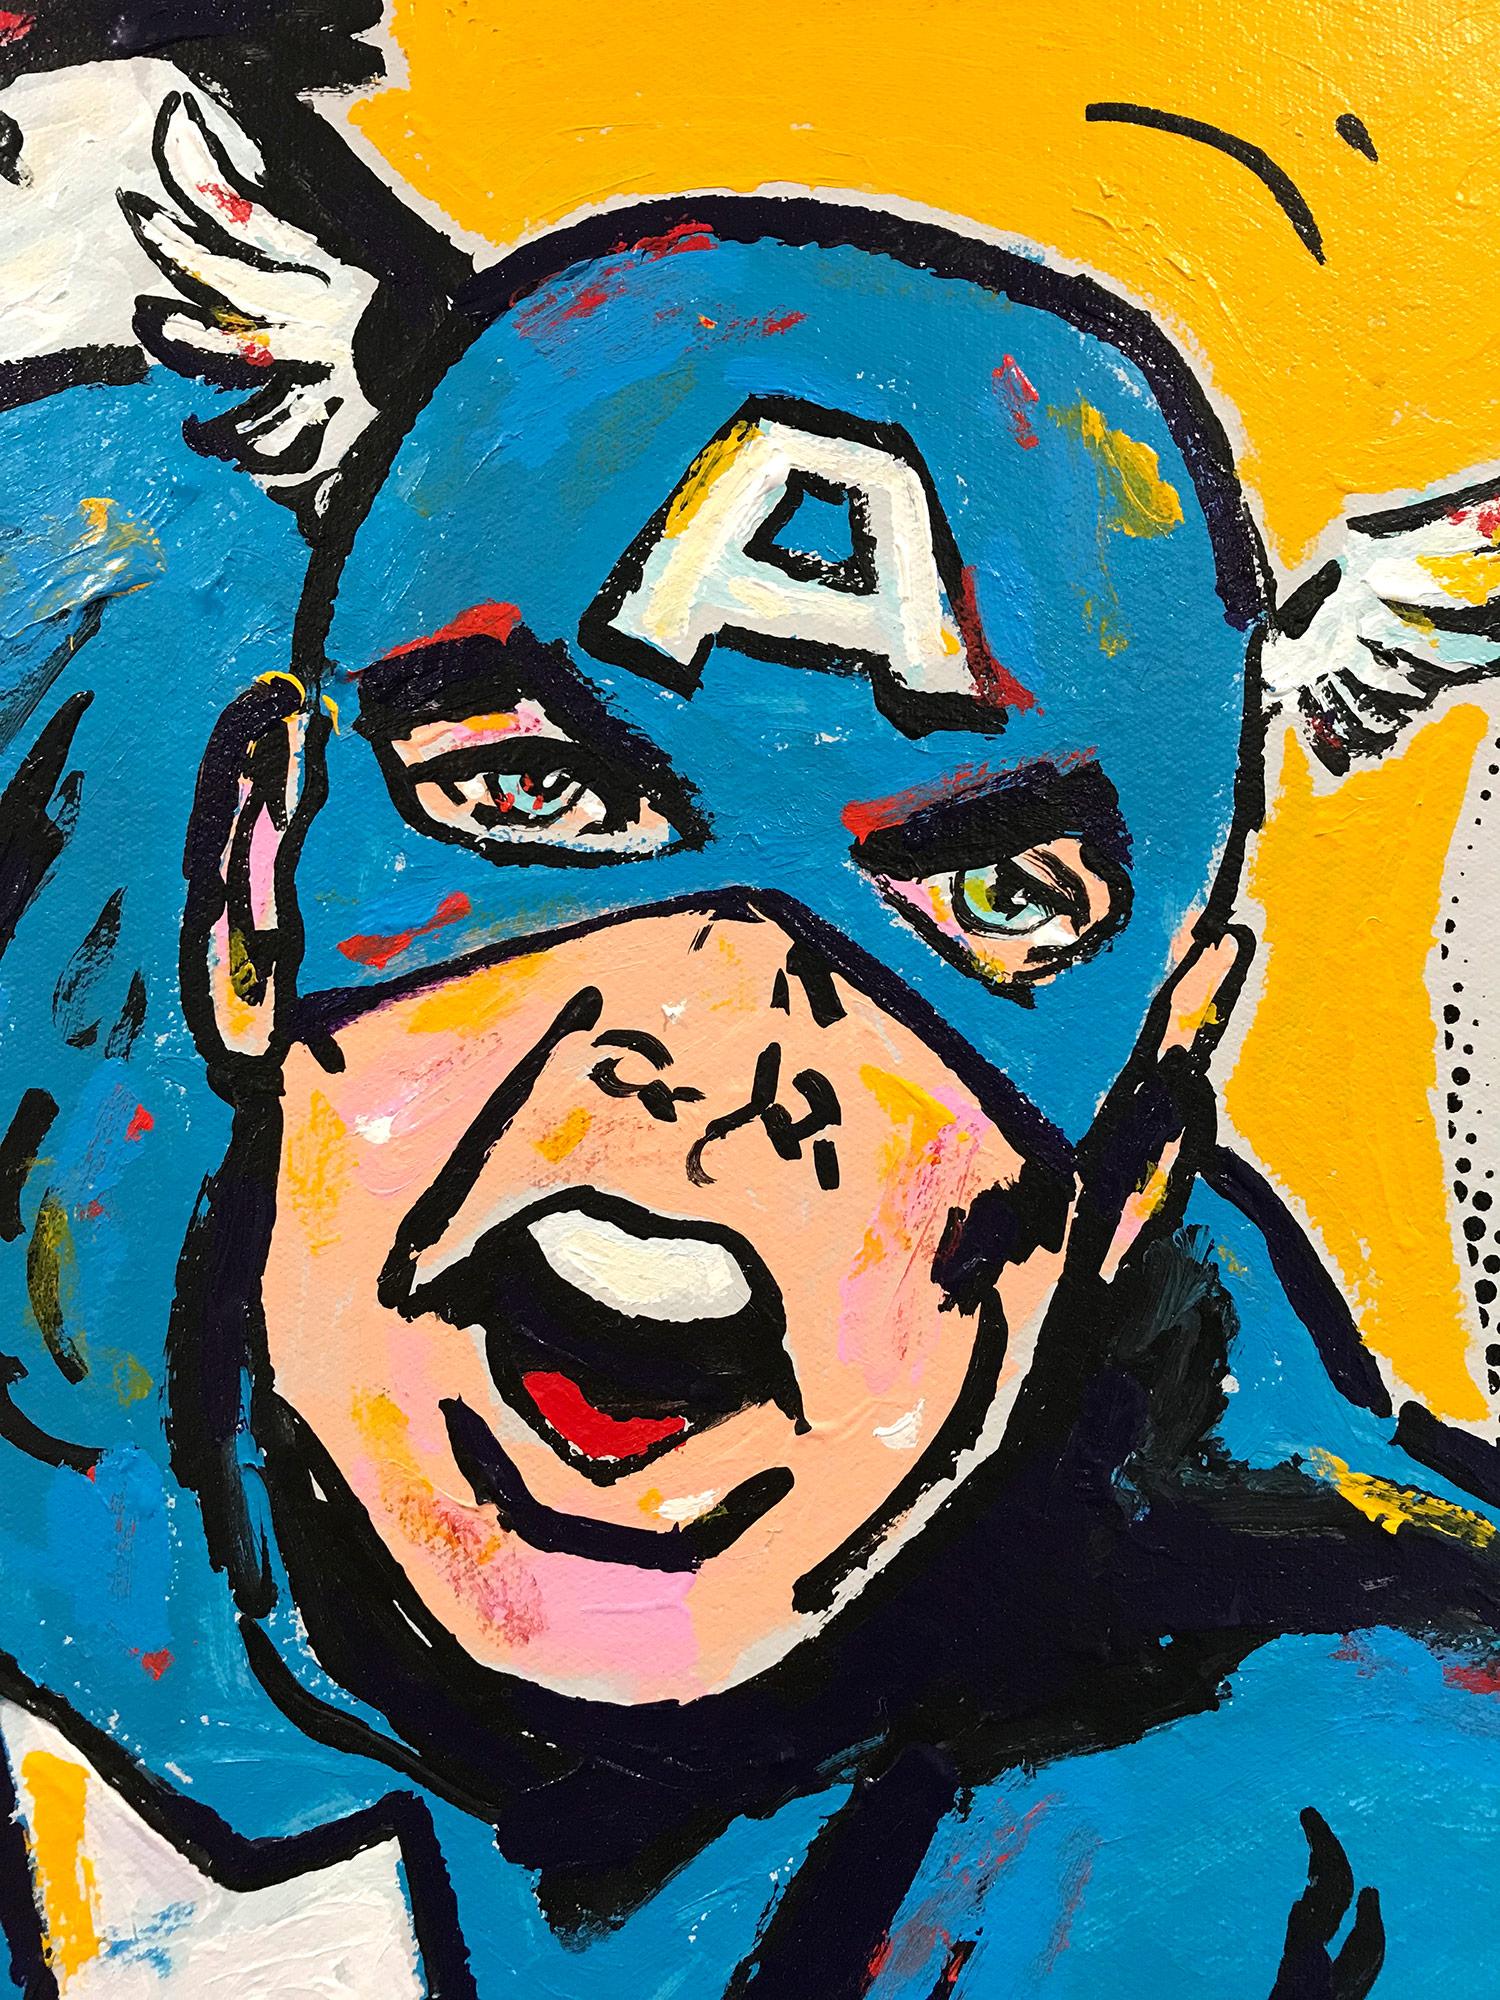 A pop piece depicting Captain America juxtaposed with John F. Kennedy. With impasto painting, silkscreening, and quick brushwork we are drawn to the movement, as the artist is able to engage his viewer with contrasting highlights and shadow. This